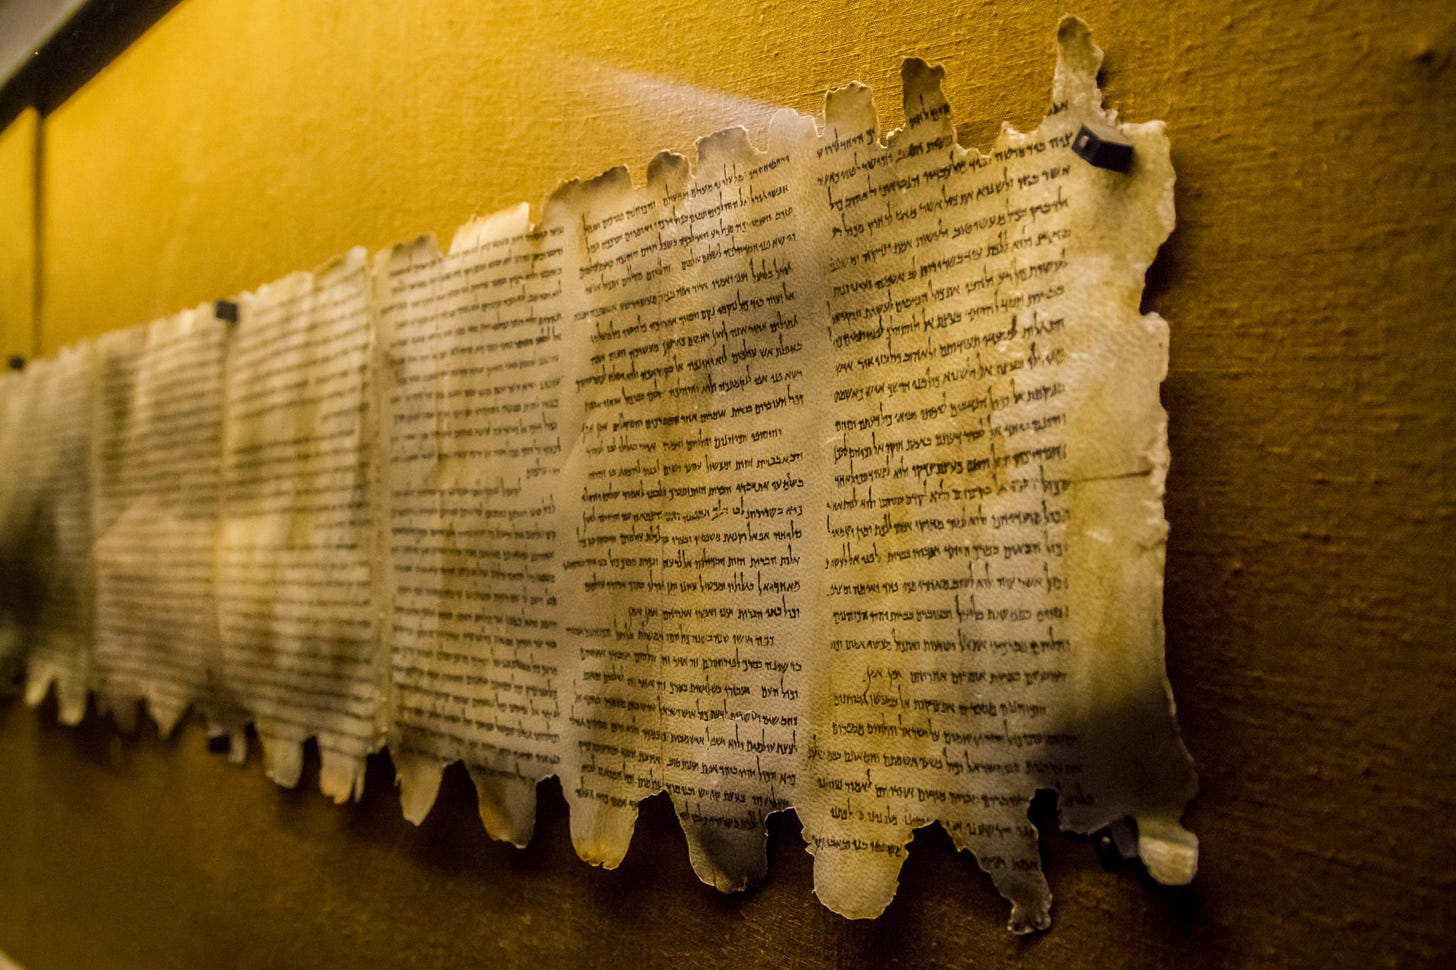 New Radiocarbon Ages of Dead Sea Scrolls? Part 2 - Reasons to Believe